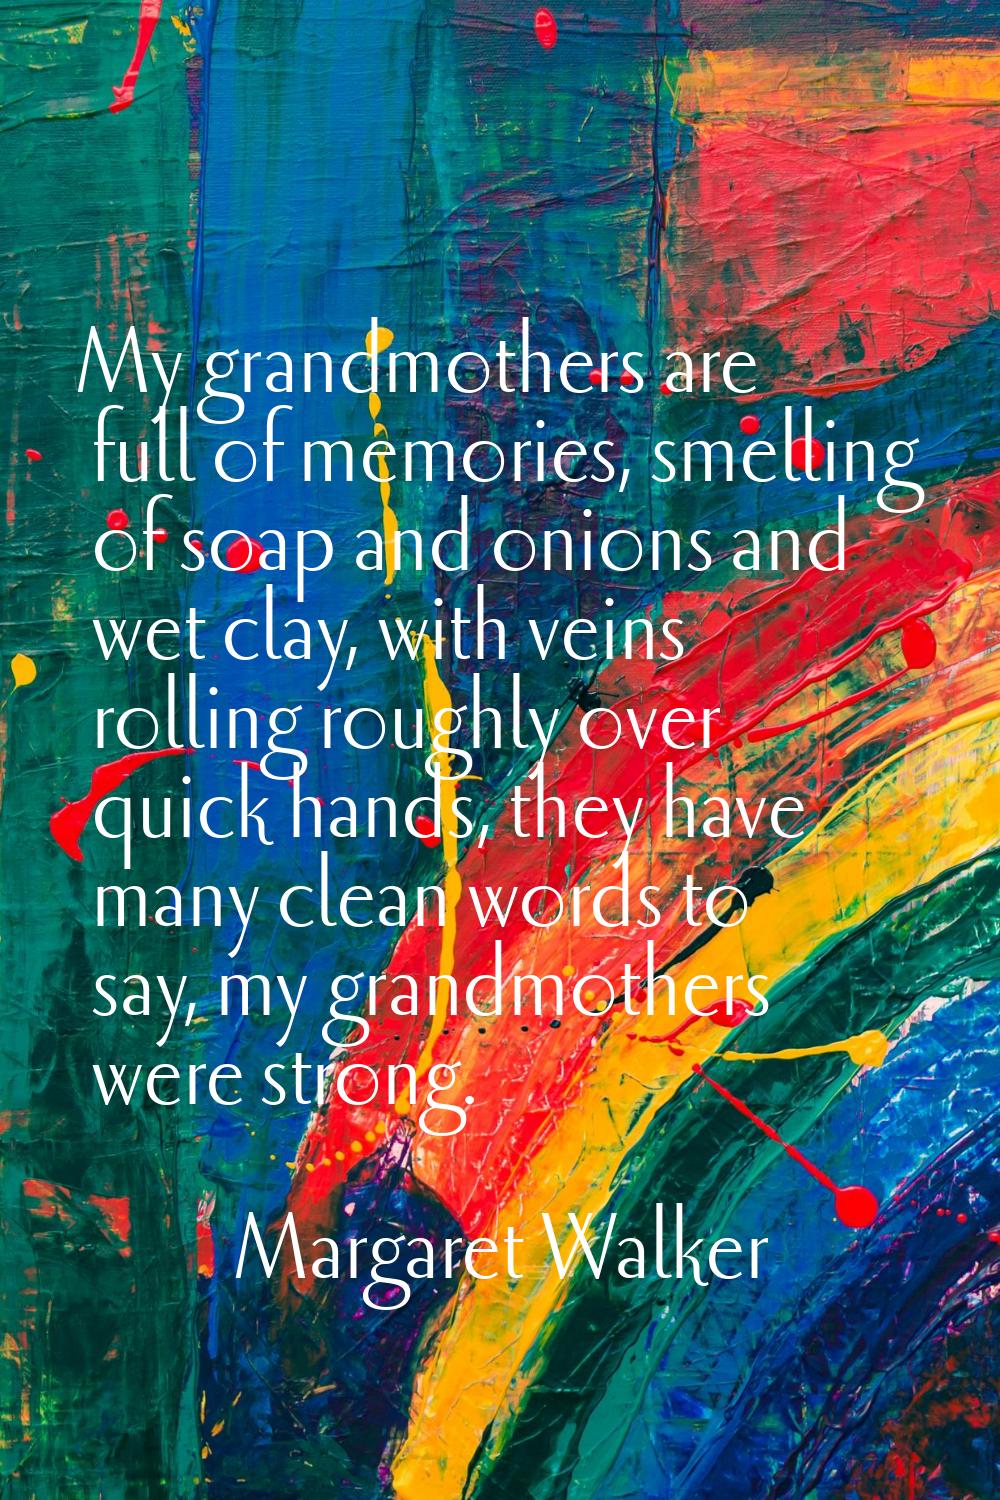 My grandmothers are full of memories, smelling of soap and onions and wet clay, with veins rolling 